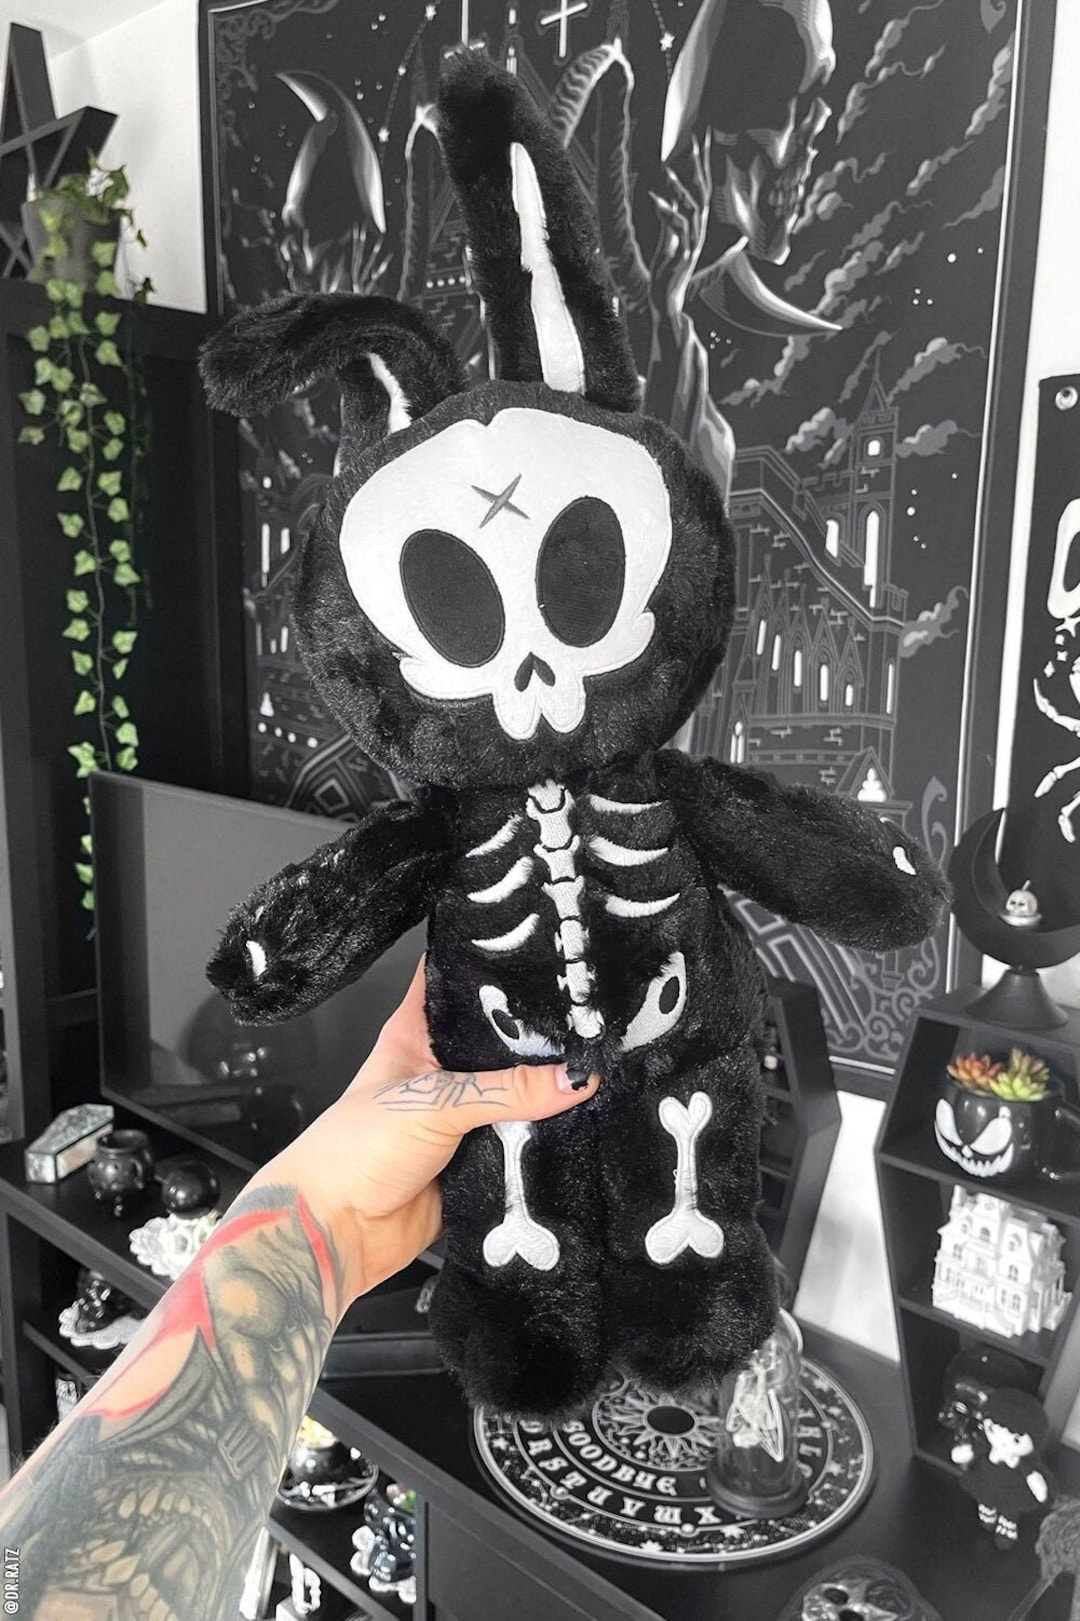 Get Your Quirky On with our Cute Gothic Rabbit Plush Toy - Perfect